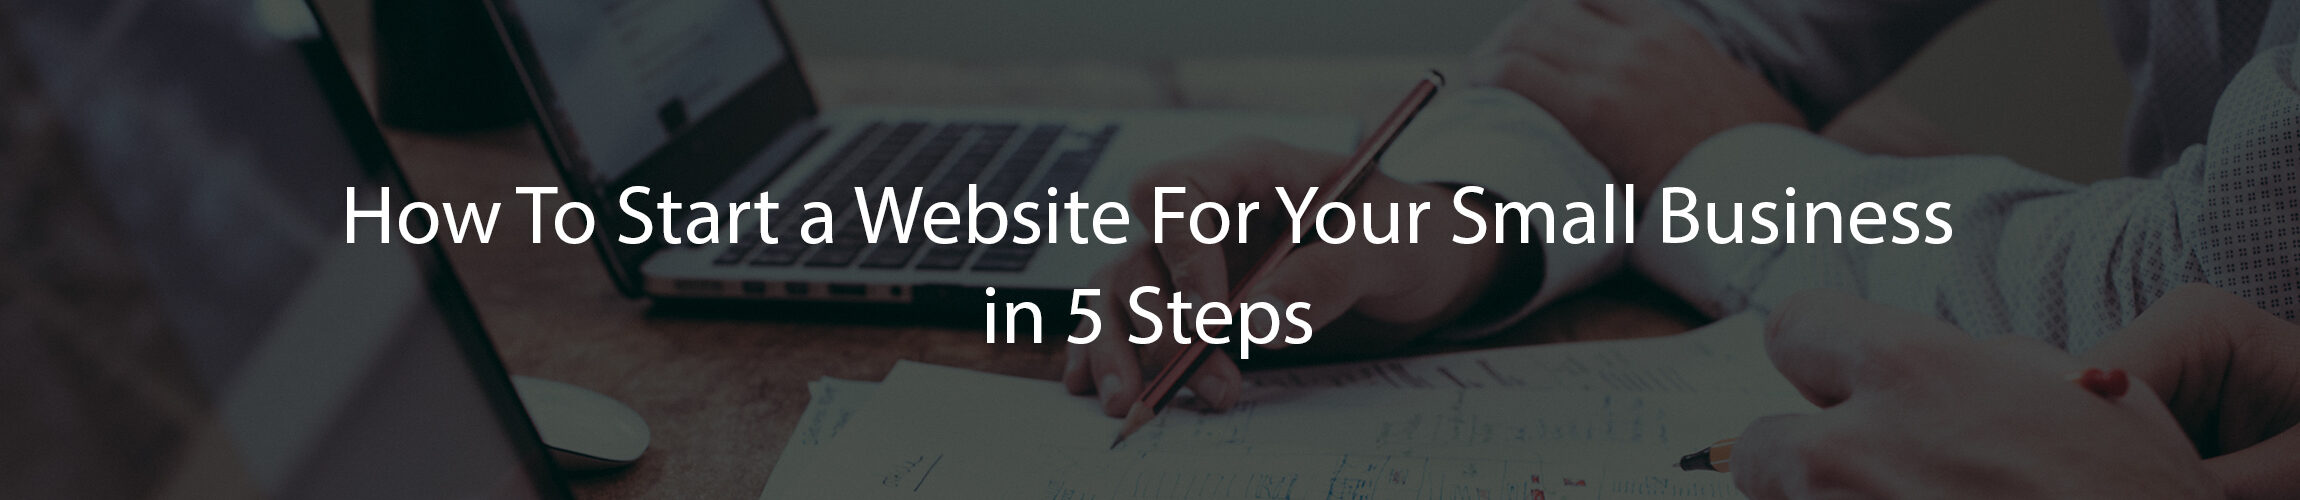 How To Start a Website For Your Small Business in 5 Steps